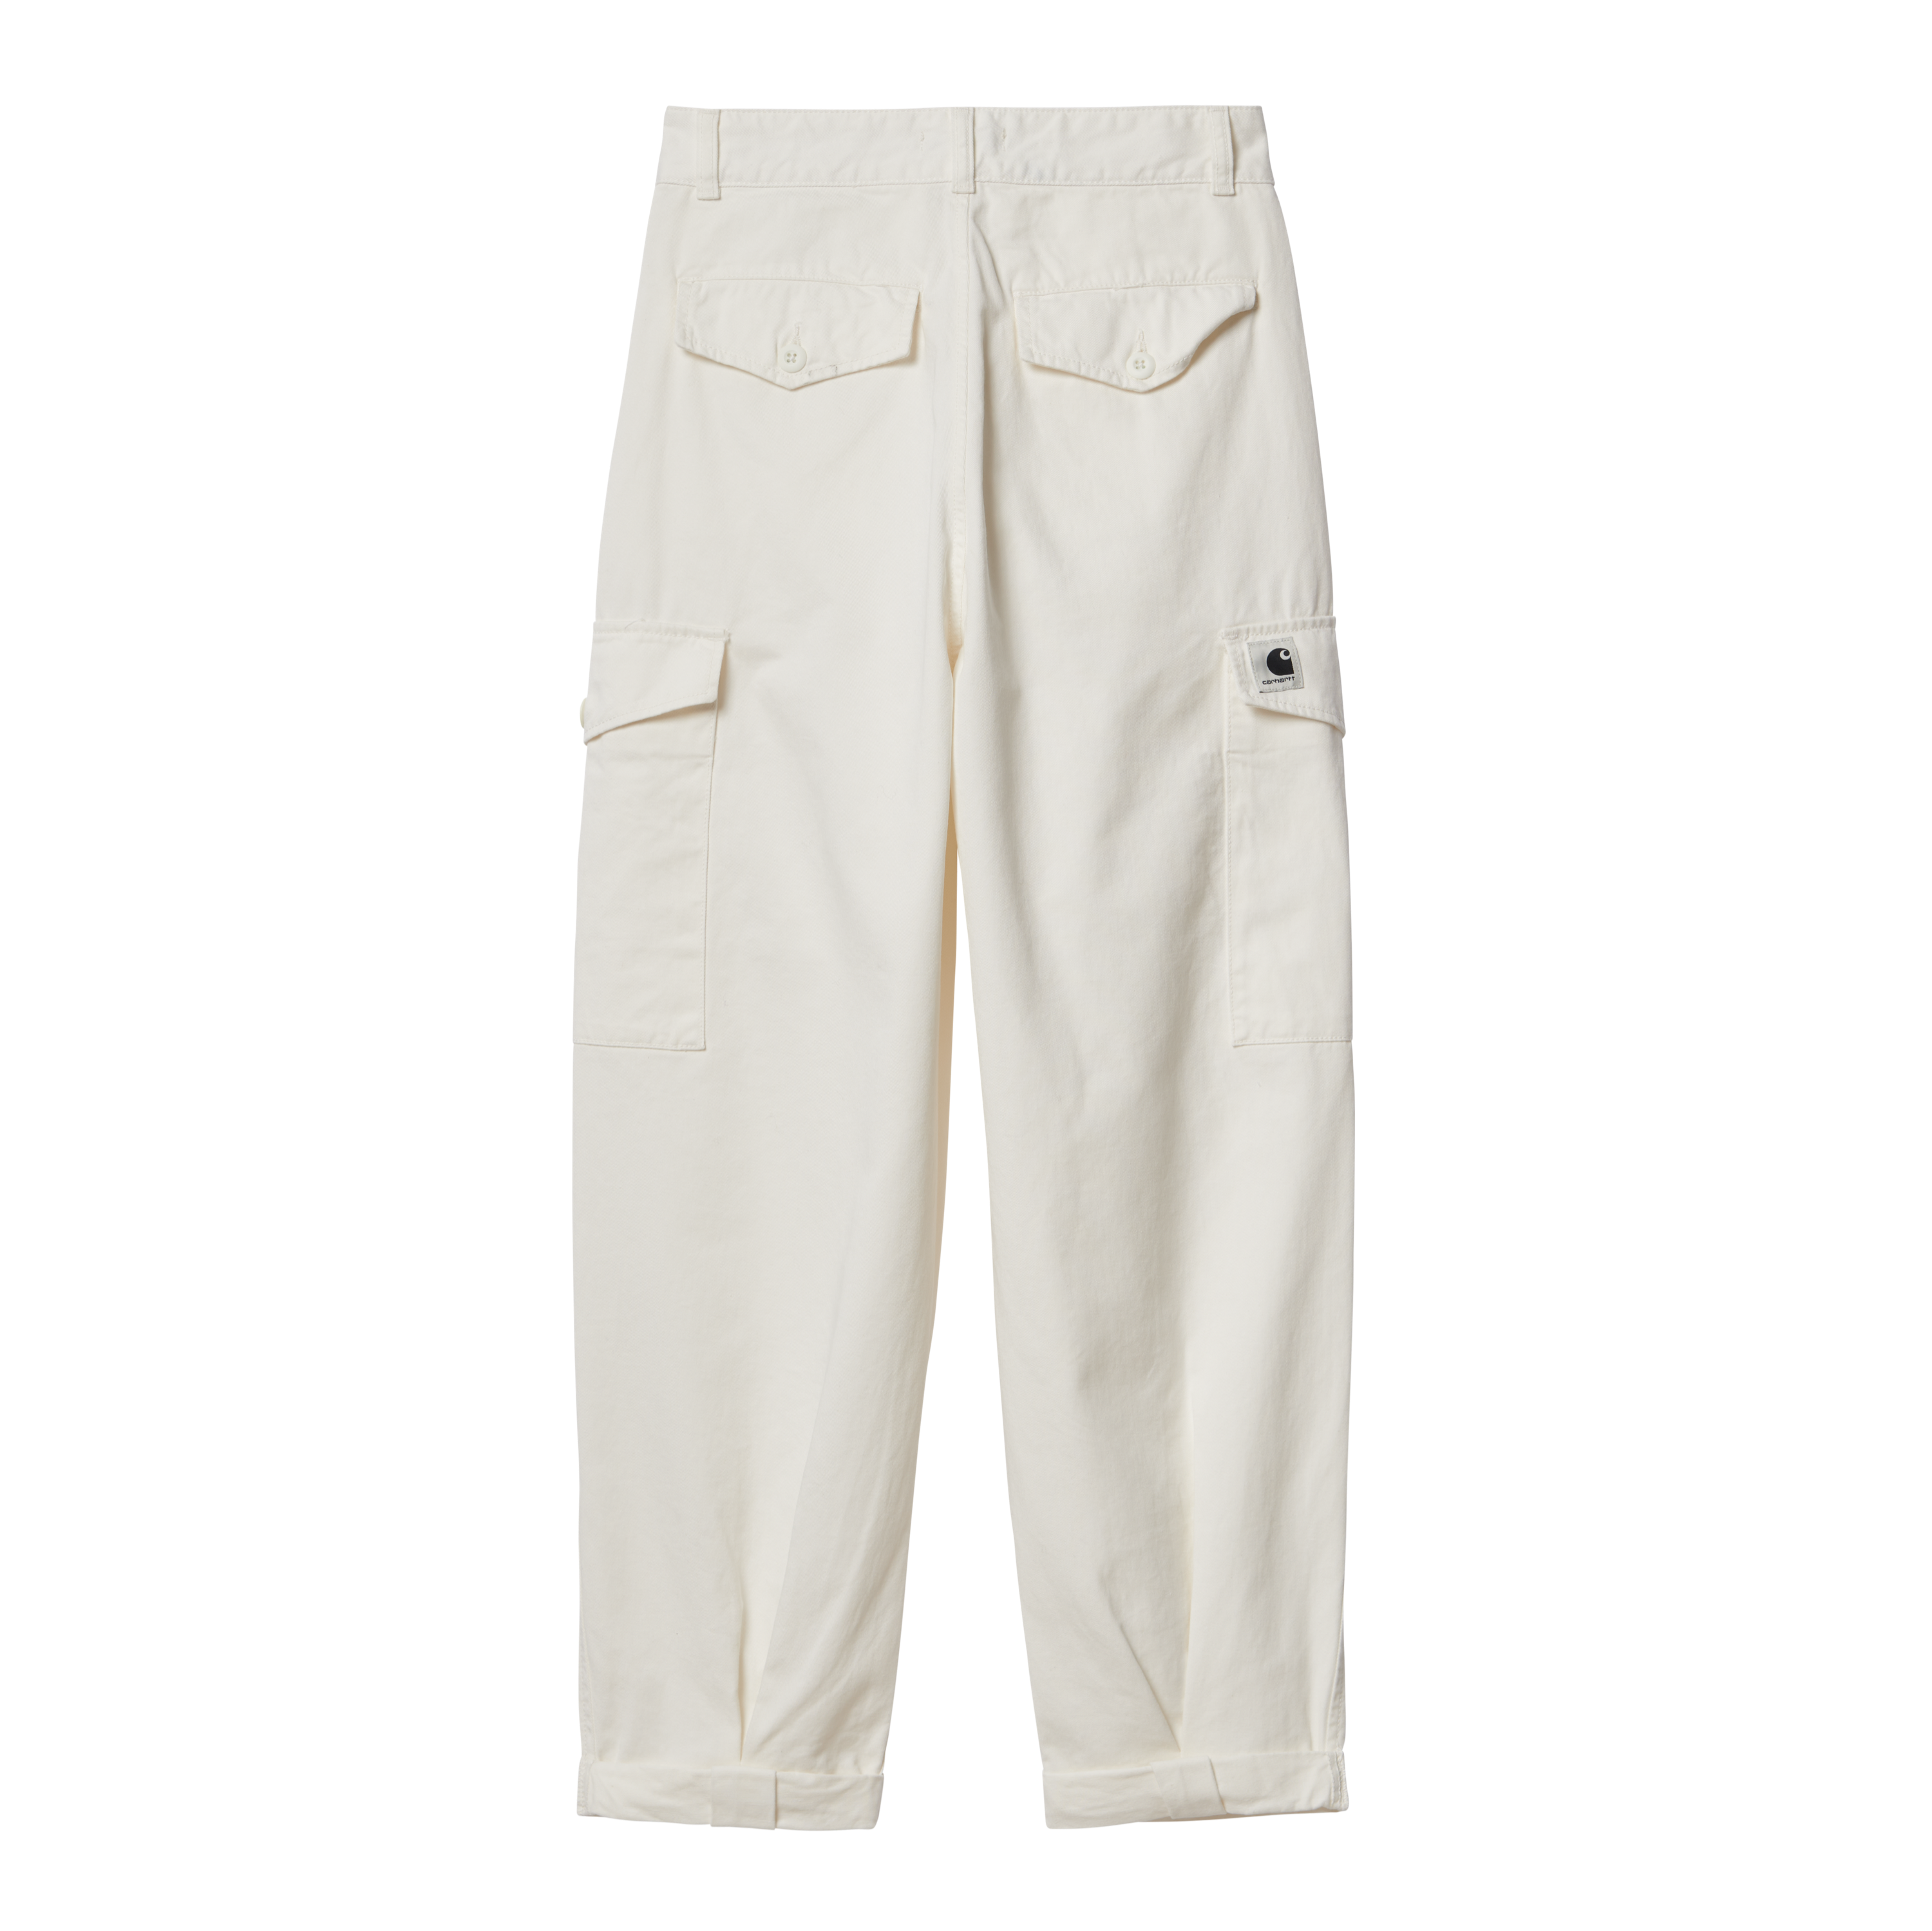 Carhartt WIP Women’s Collins Pant in White